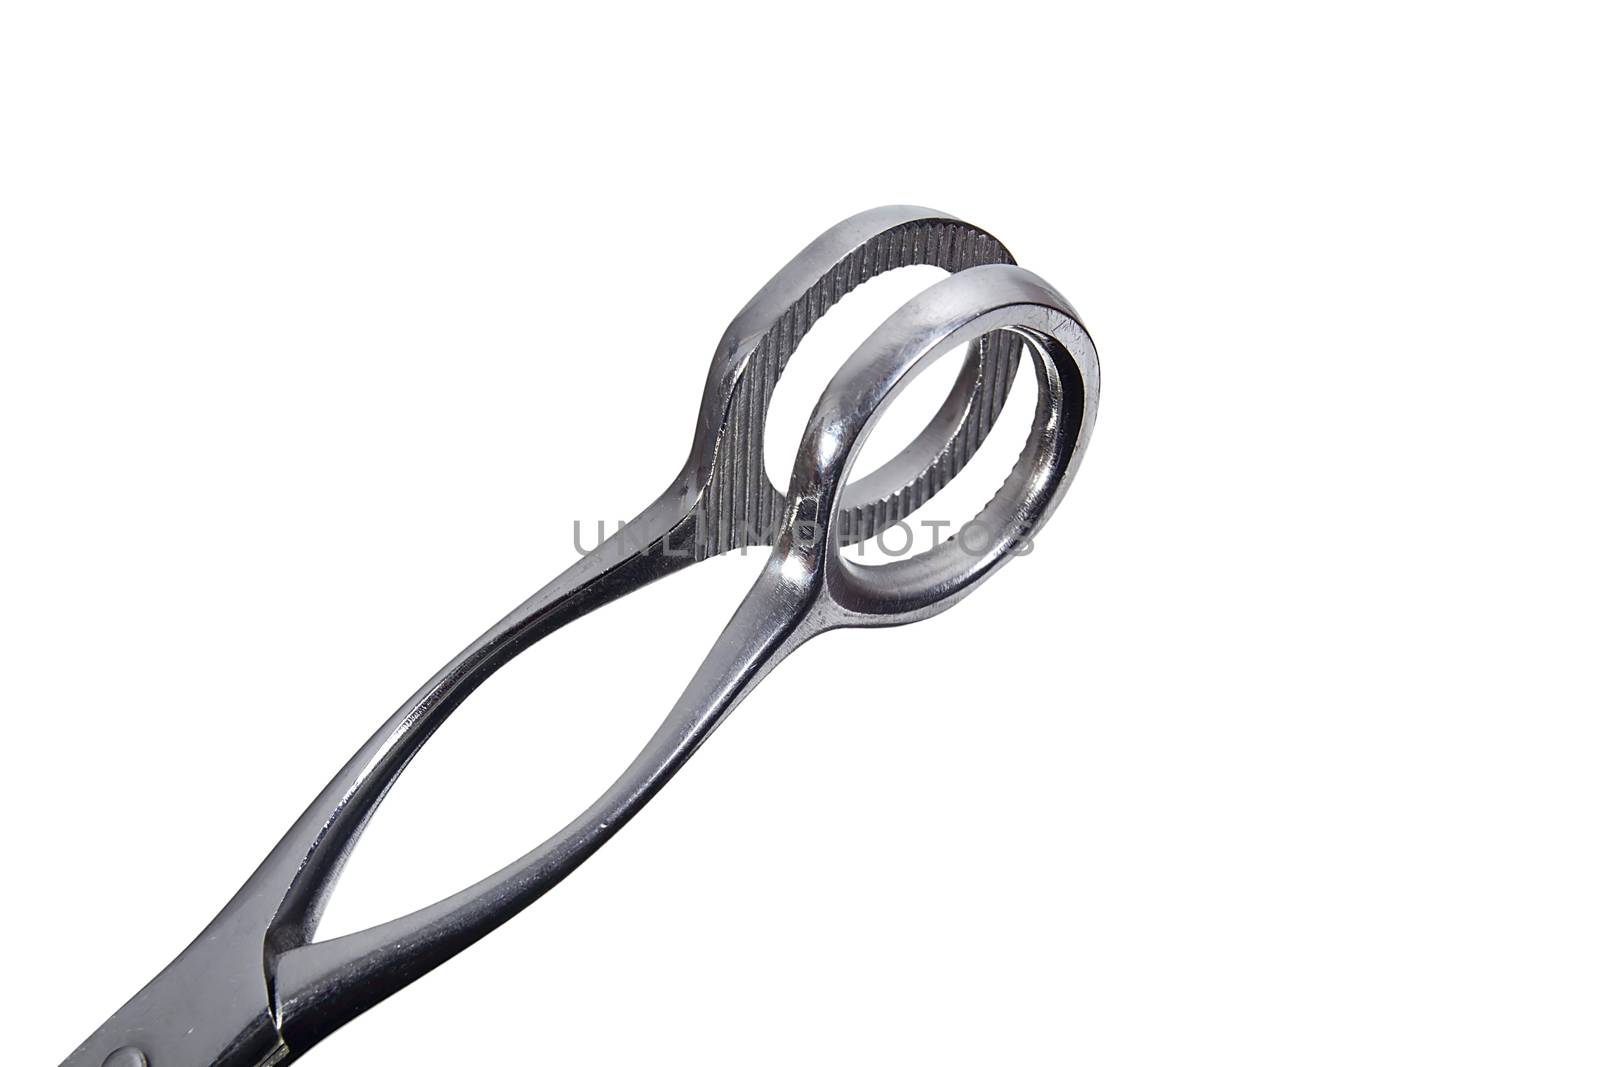 Metal surgical instrument on a gray background